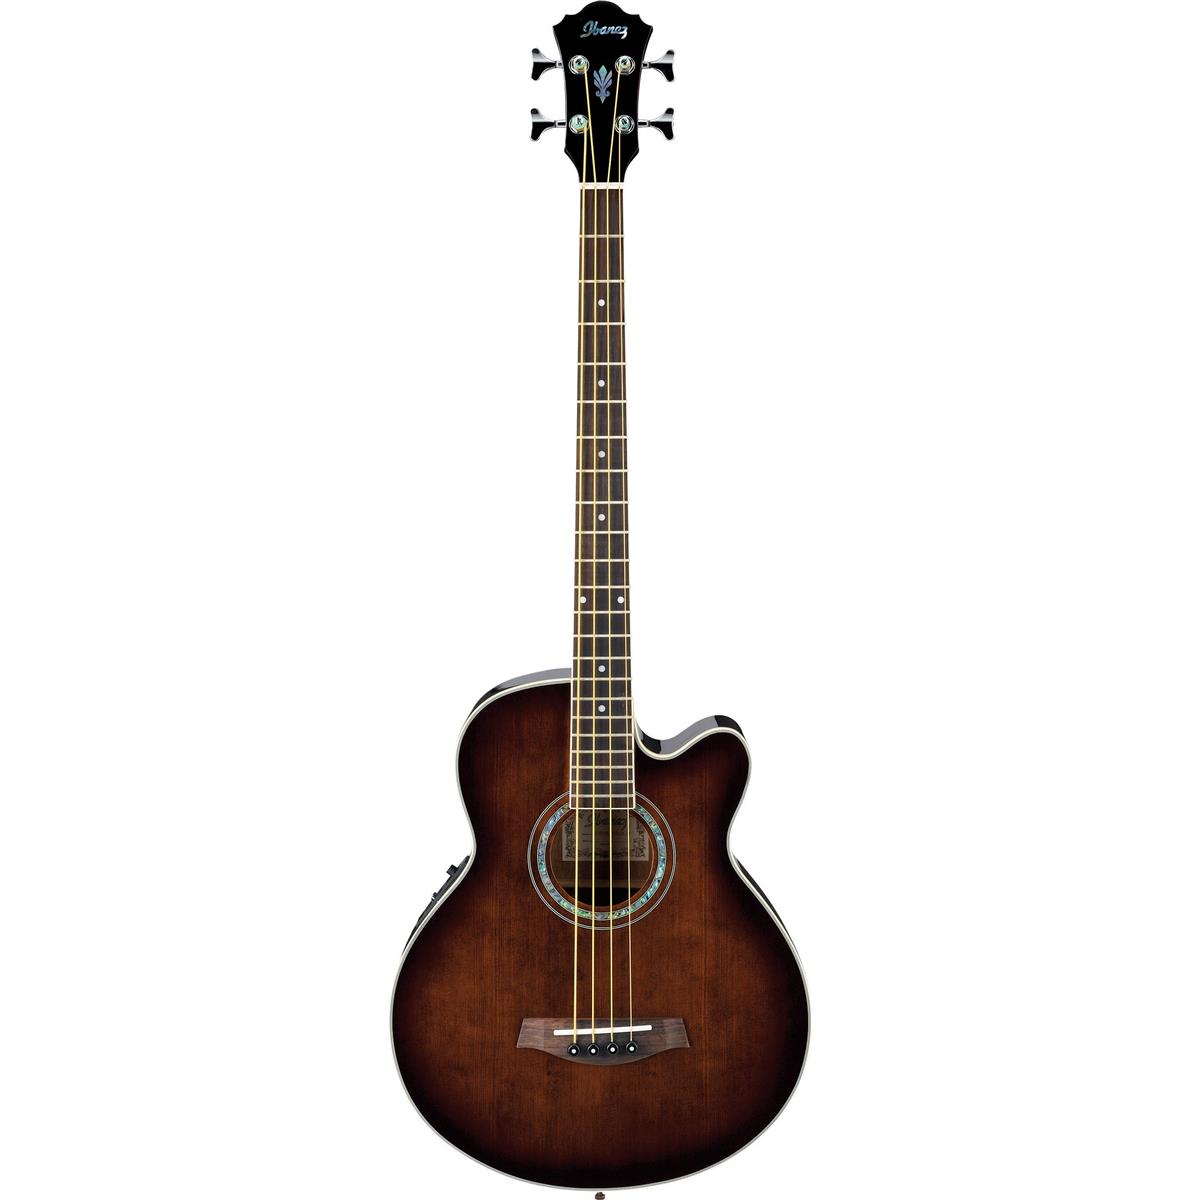 Image of Ibanez AEB10E Acoustic Electric Bass Guitar